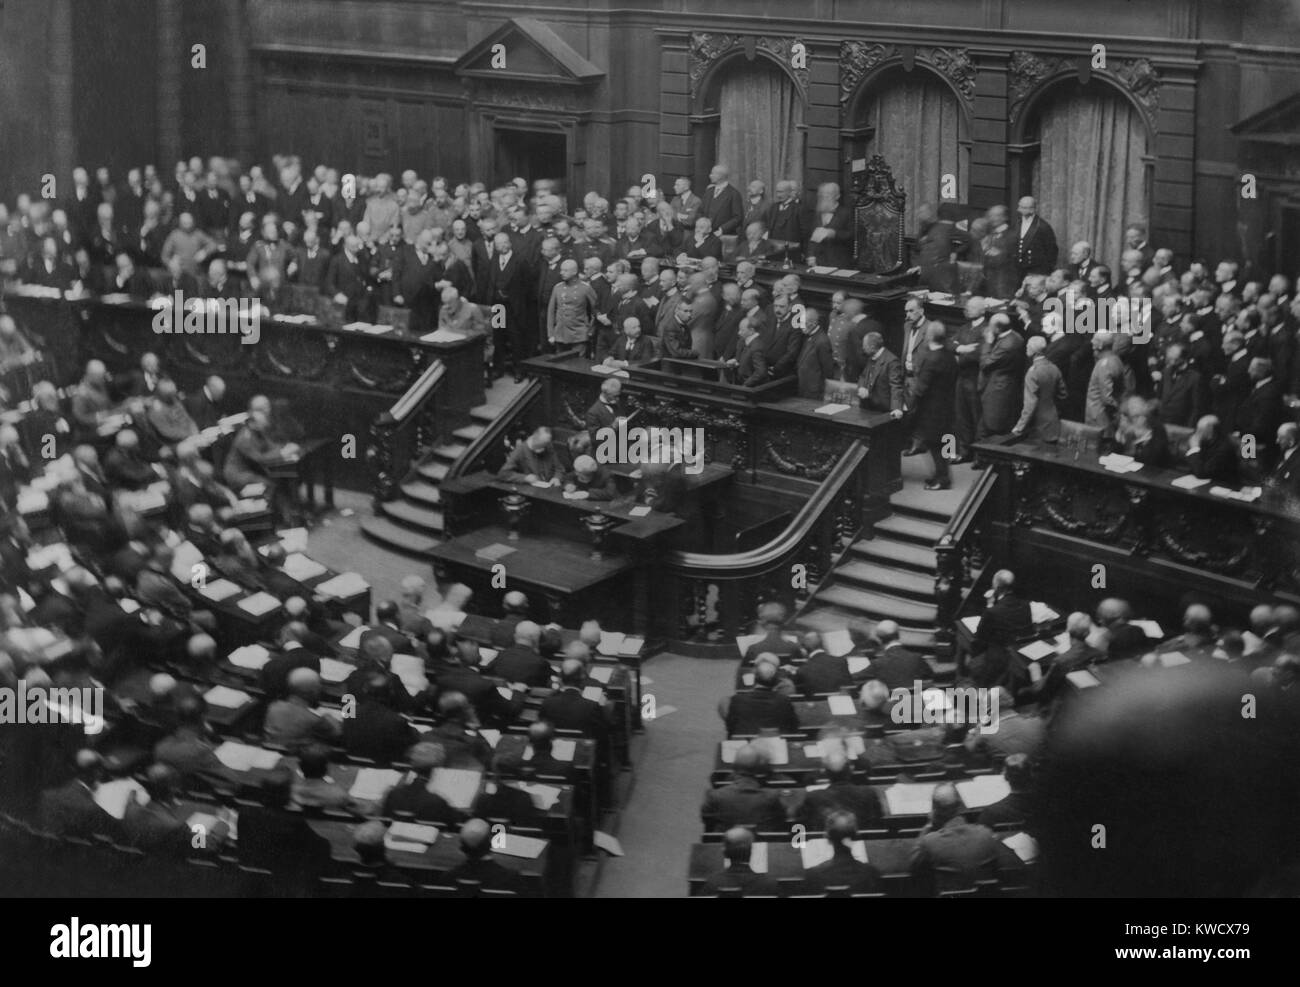 Meeting of delegates in the Great Hall of the Reichstag, Nov. 1918. Delegates of Soldiers and Workmens councils replaced traditional politicians in the revolutionary Reichstag. An Executive Council of centrist and leftist socialists (SPD and USPD parties) members functioned as Chancellor and President (BSLOC 2017 2 51) Stock Photo